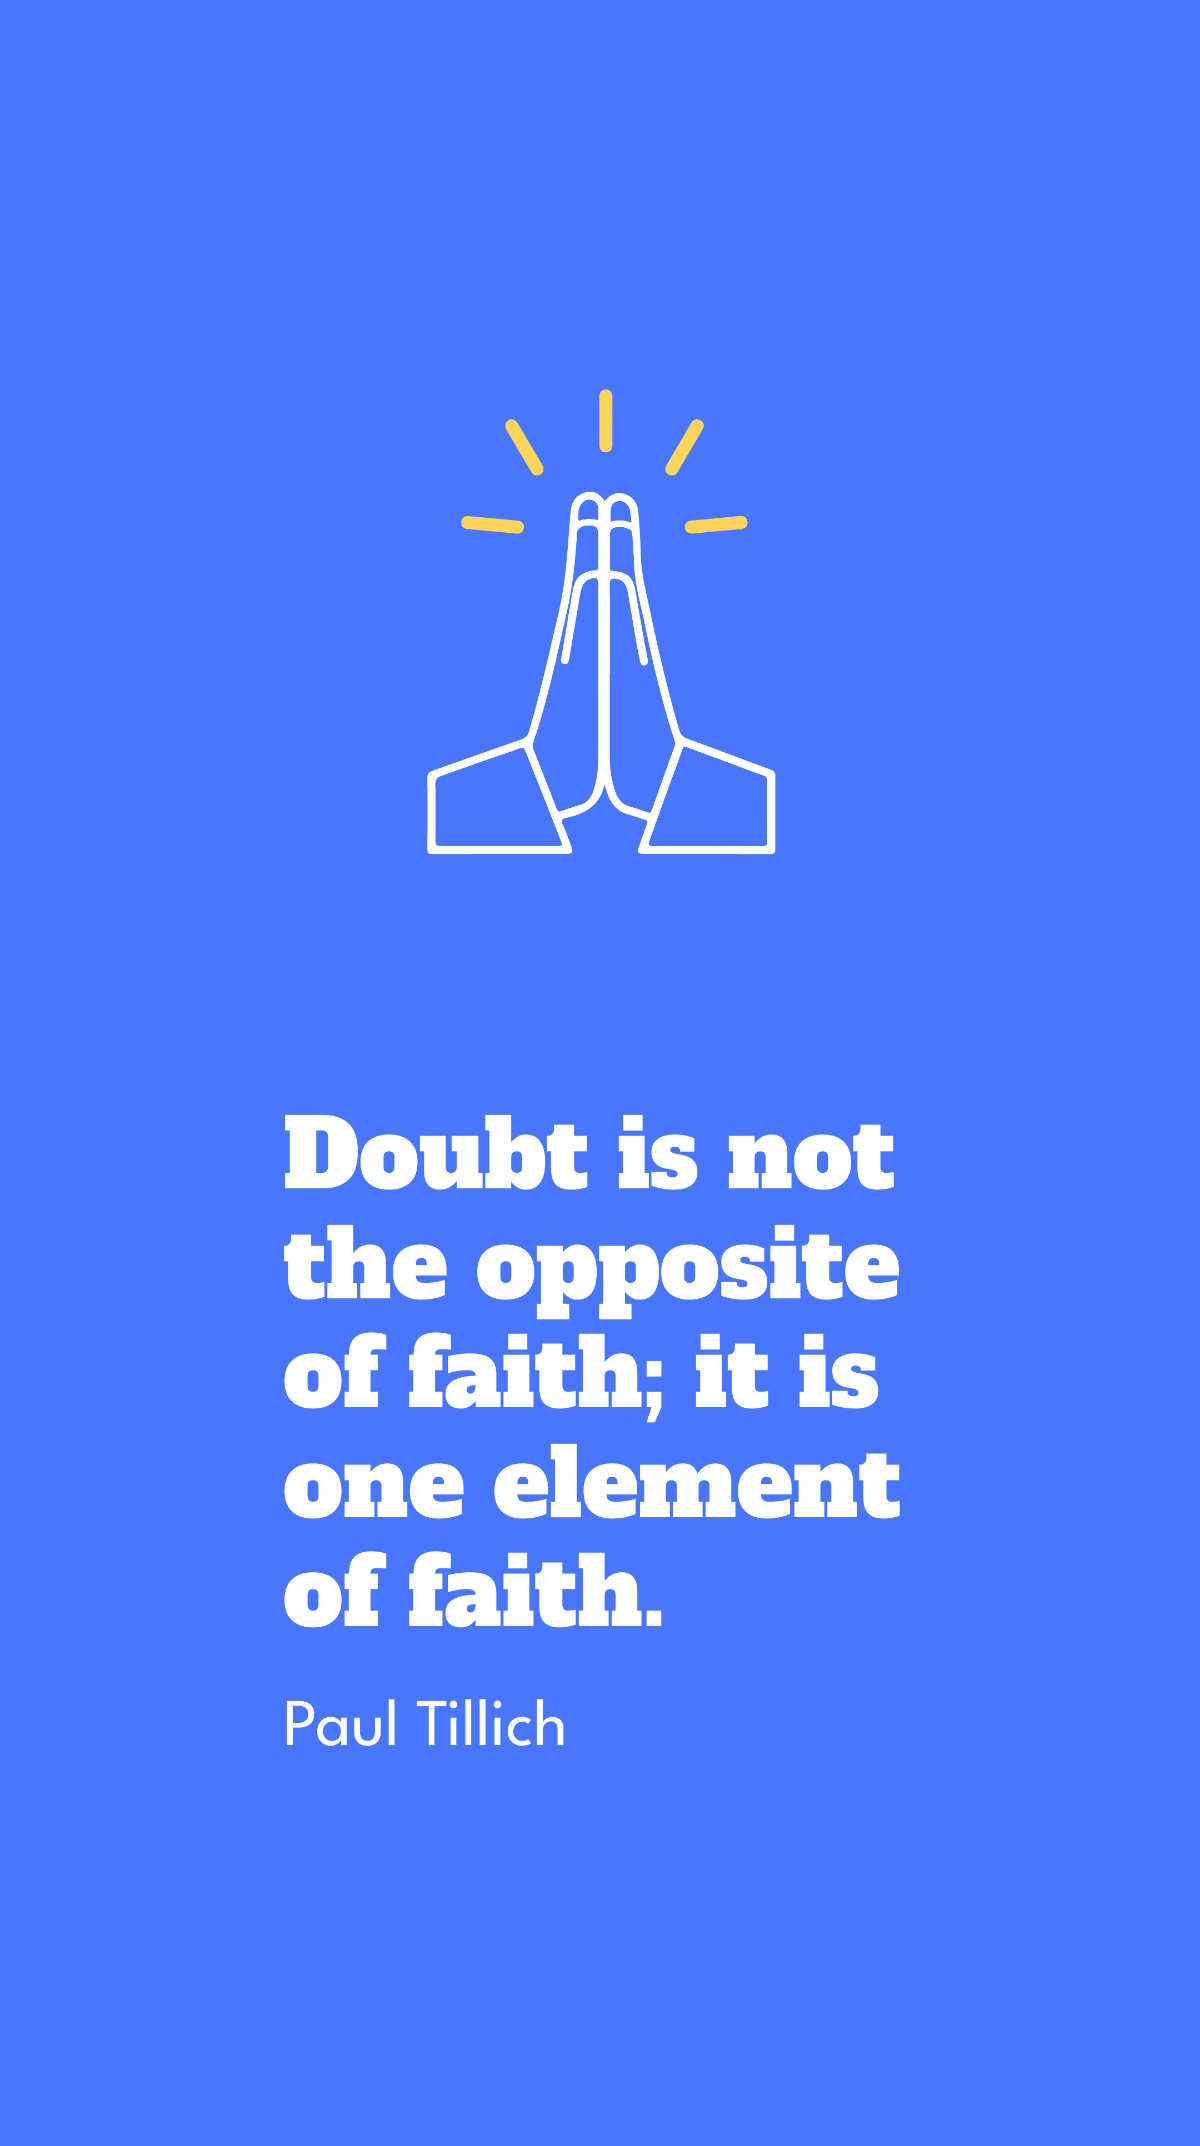 Free Paul Tillich - Doubt is not the opposite of faith; it is one element of faith. Template